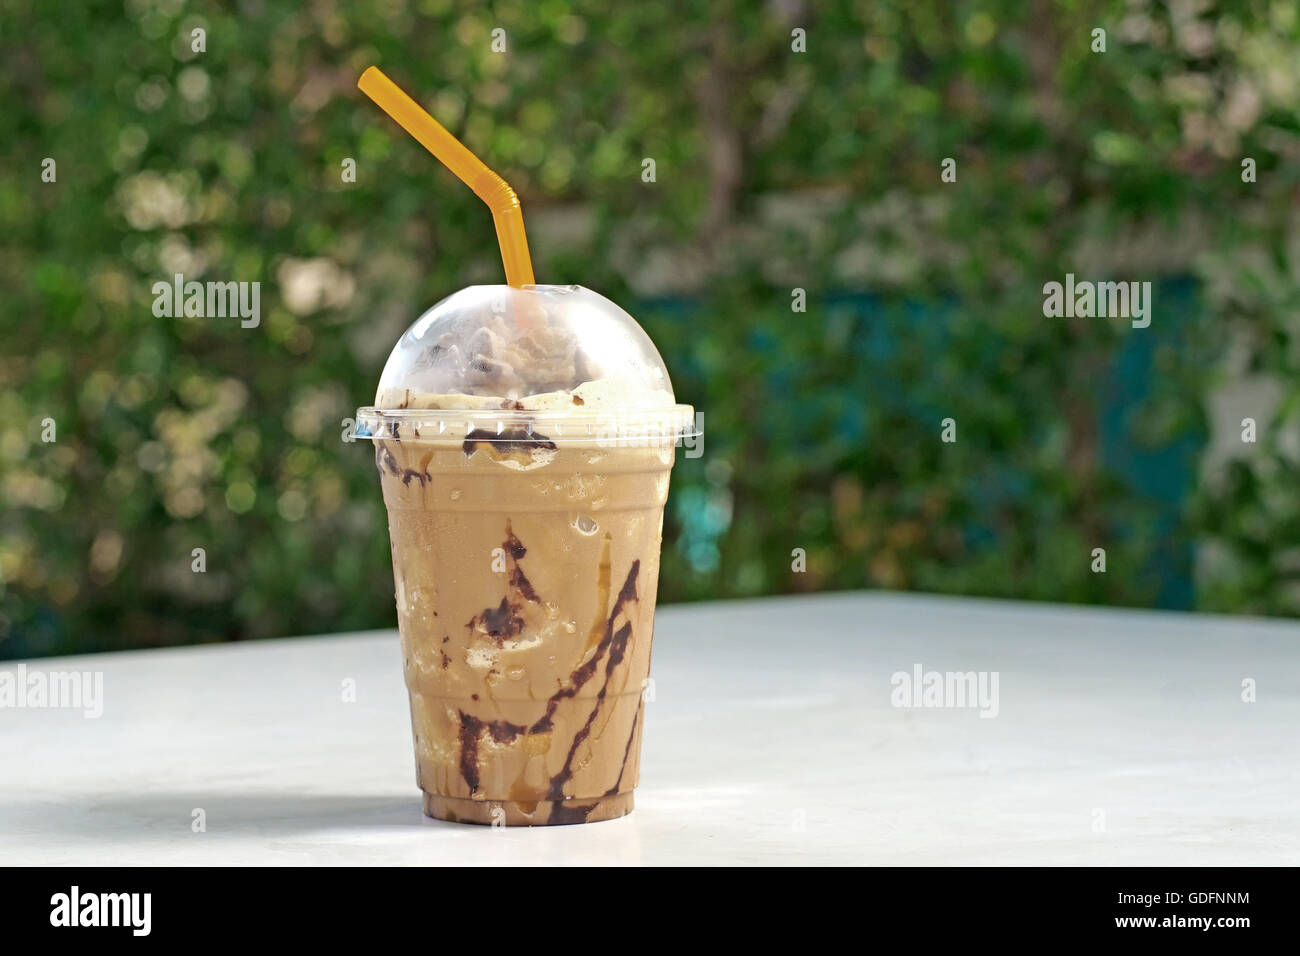 https://c8.alamy.com/comp/GDFNNM/ice-coffee-in-takeaway-cup-on-white-table-GDFNNM.jpg